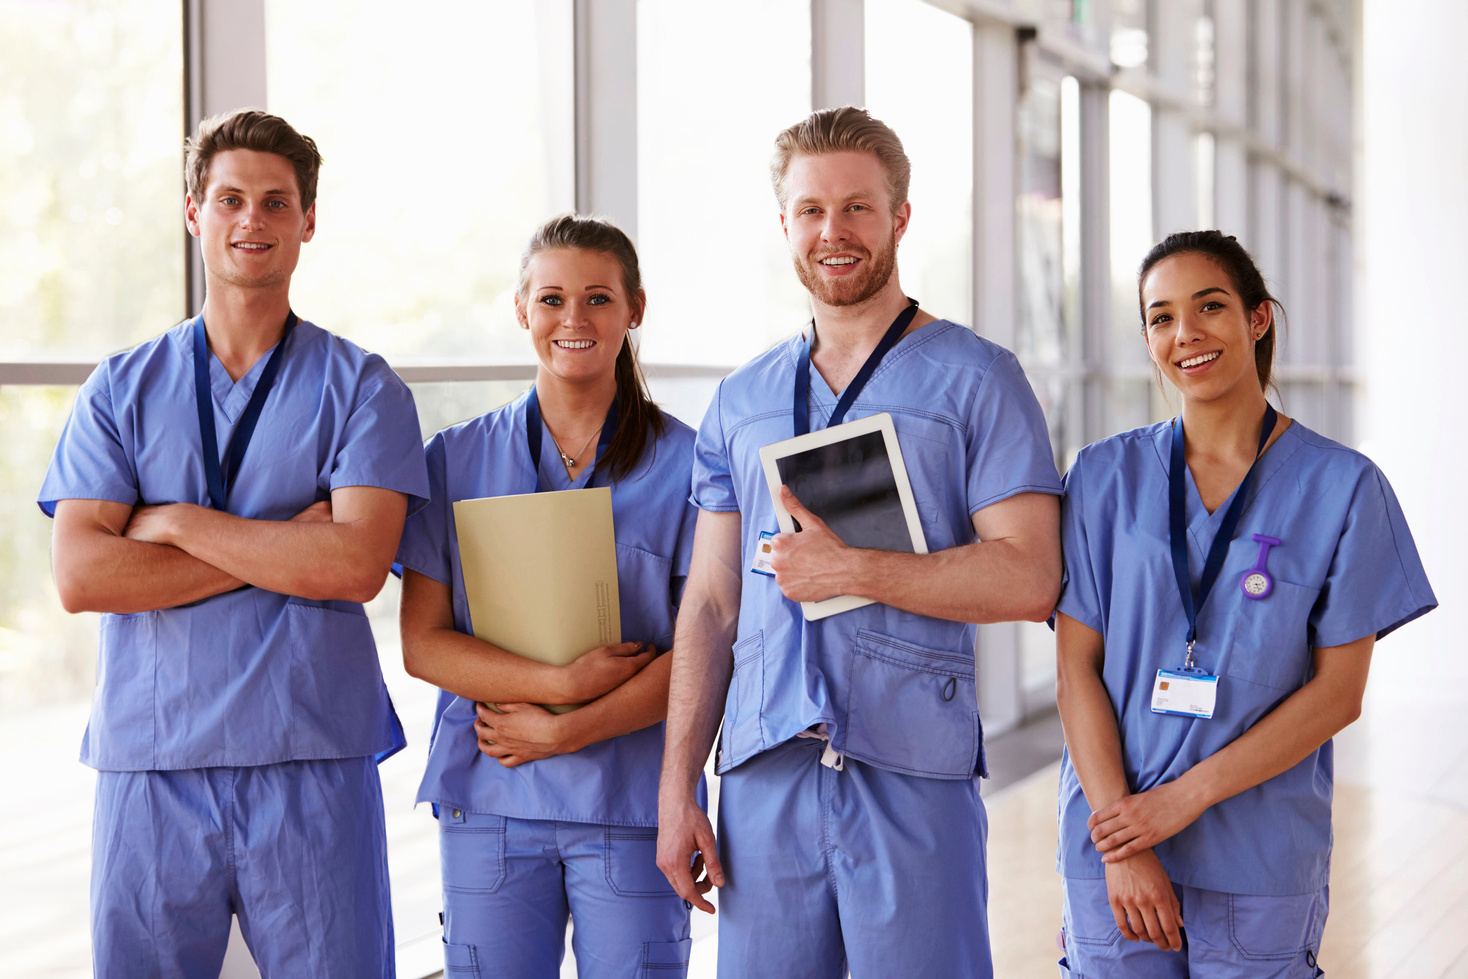 Group Portrait of Healthcare Workers  